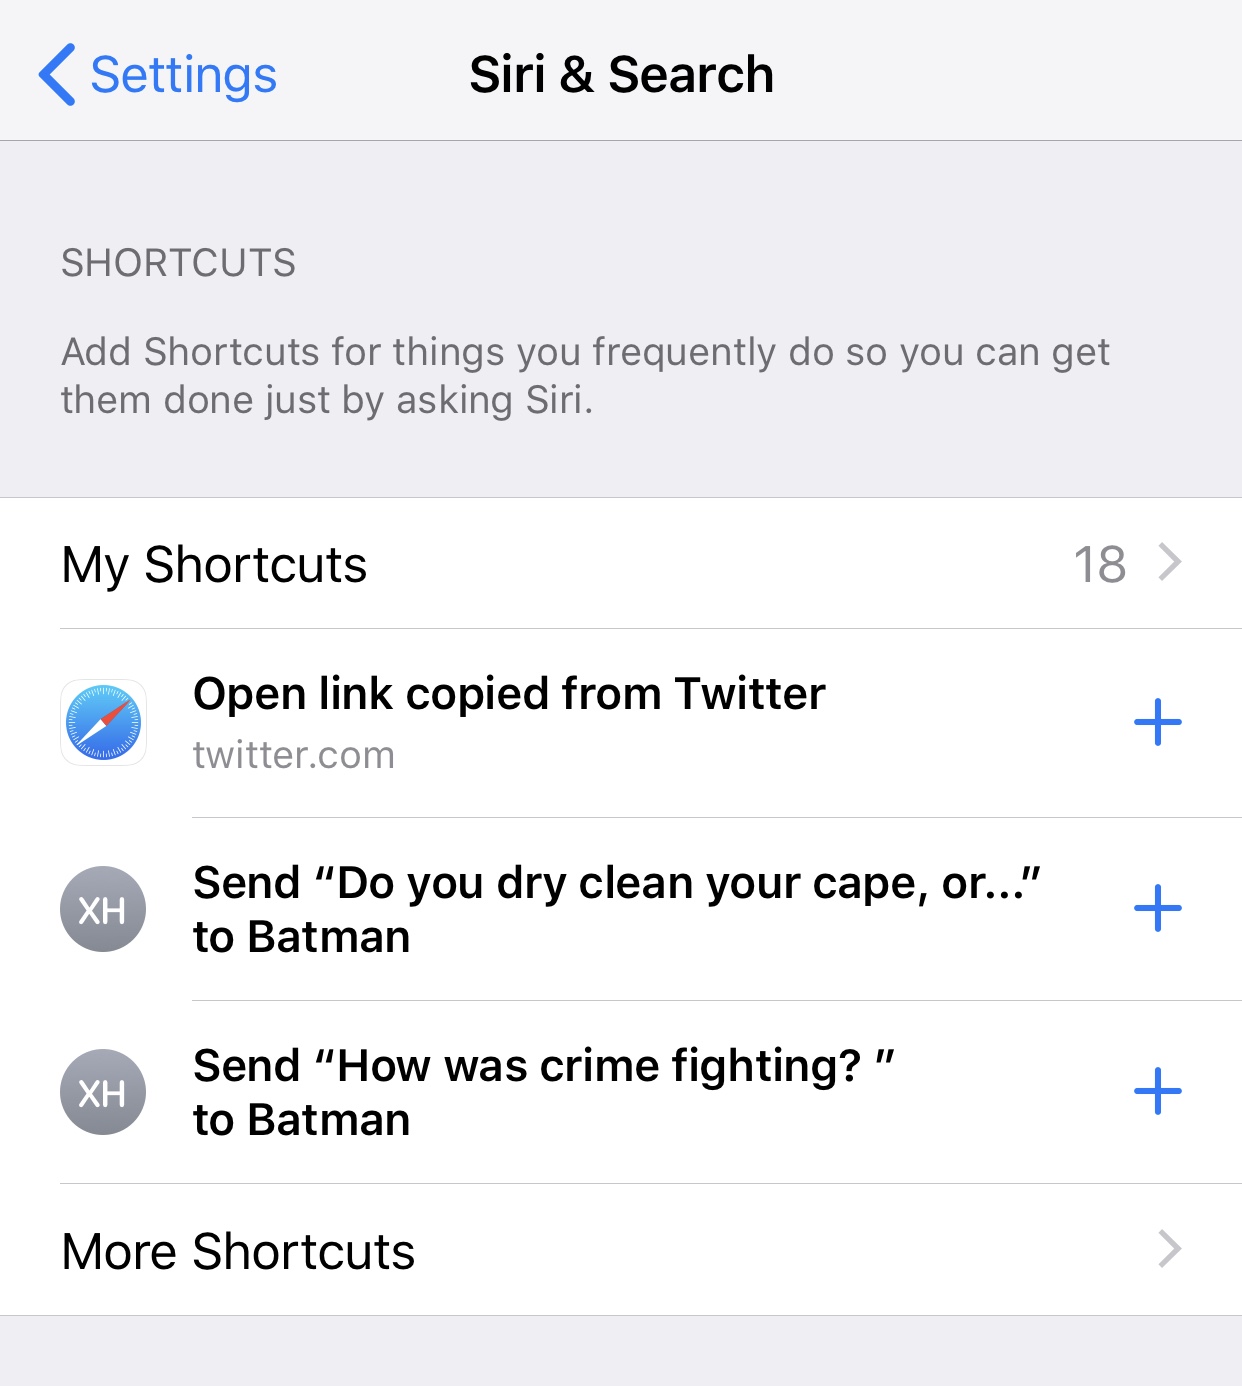 How To Combine Siri Shortcuts In iOS 12 Beta For Quick, Silent Commands